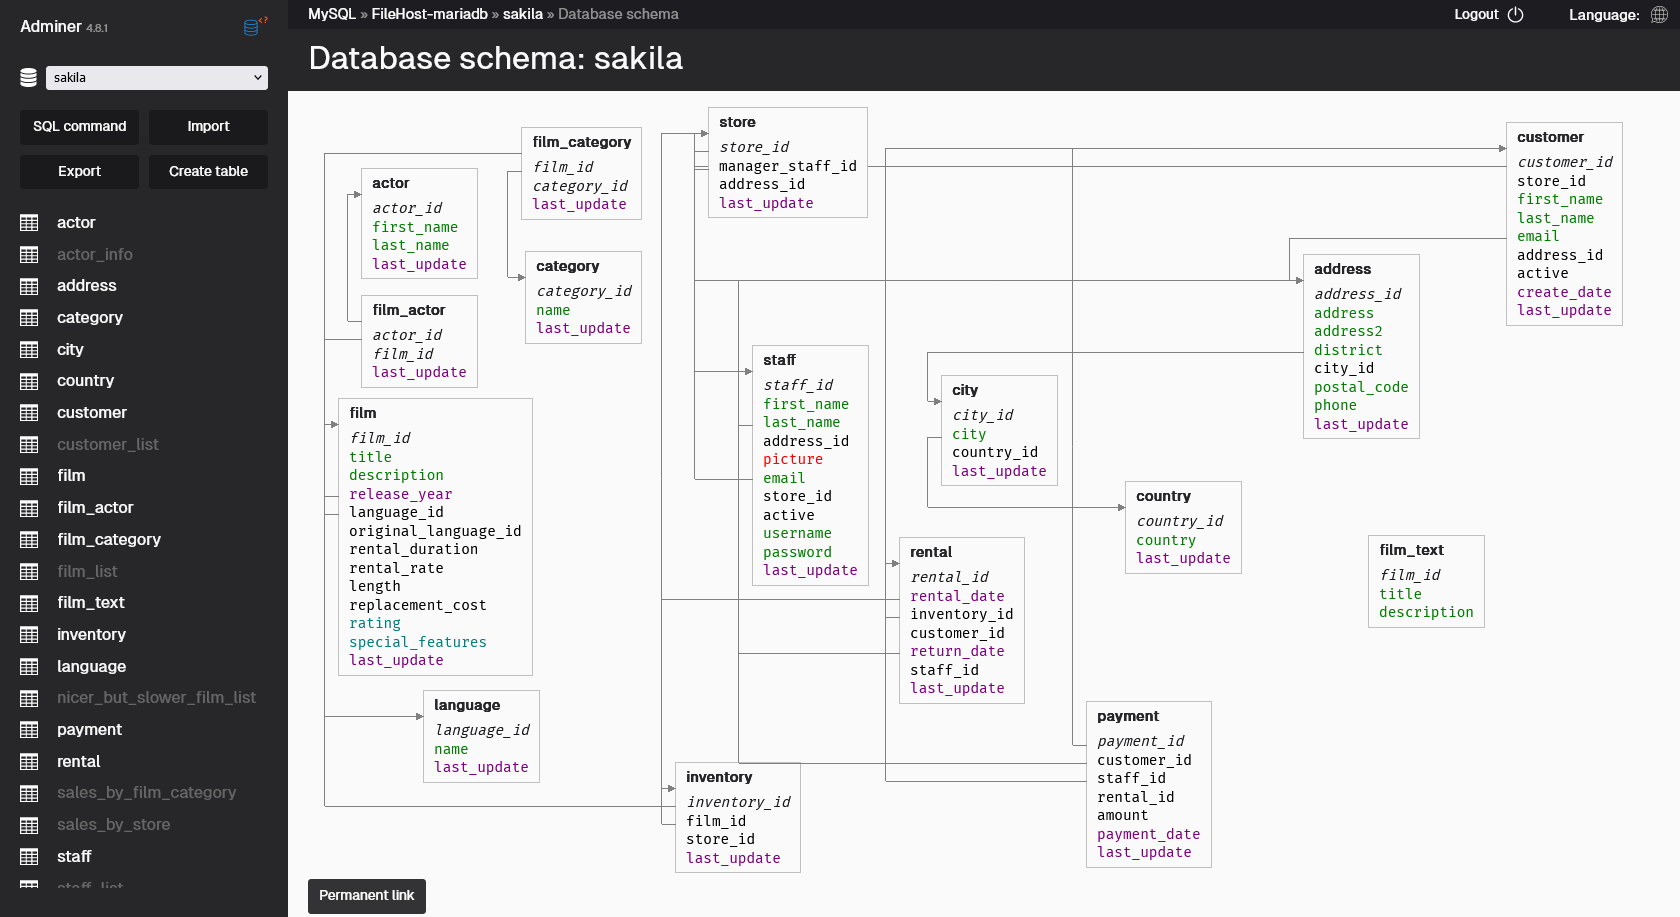 Simple Theme for Adminer - Schema